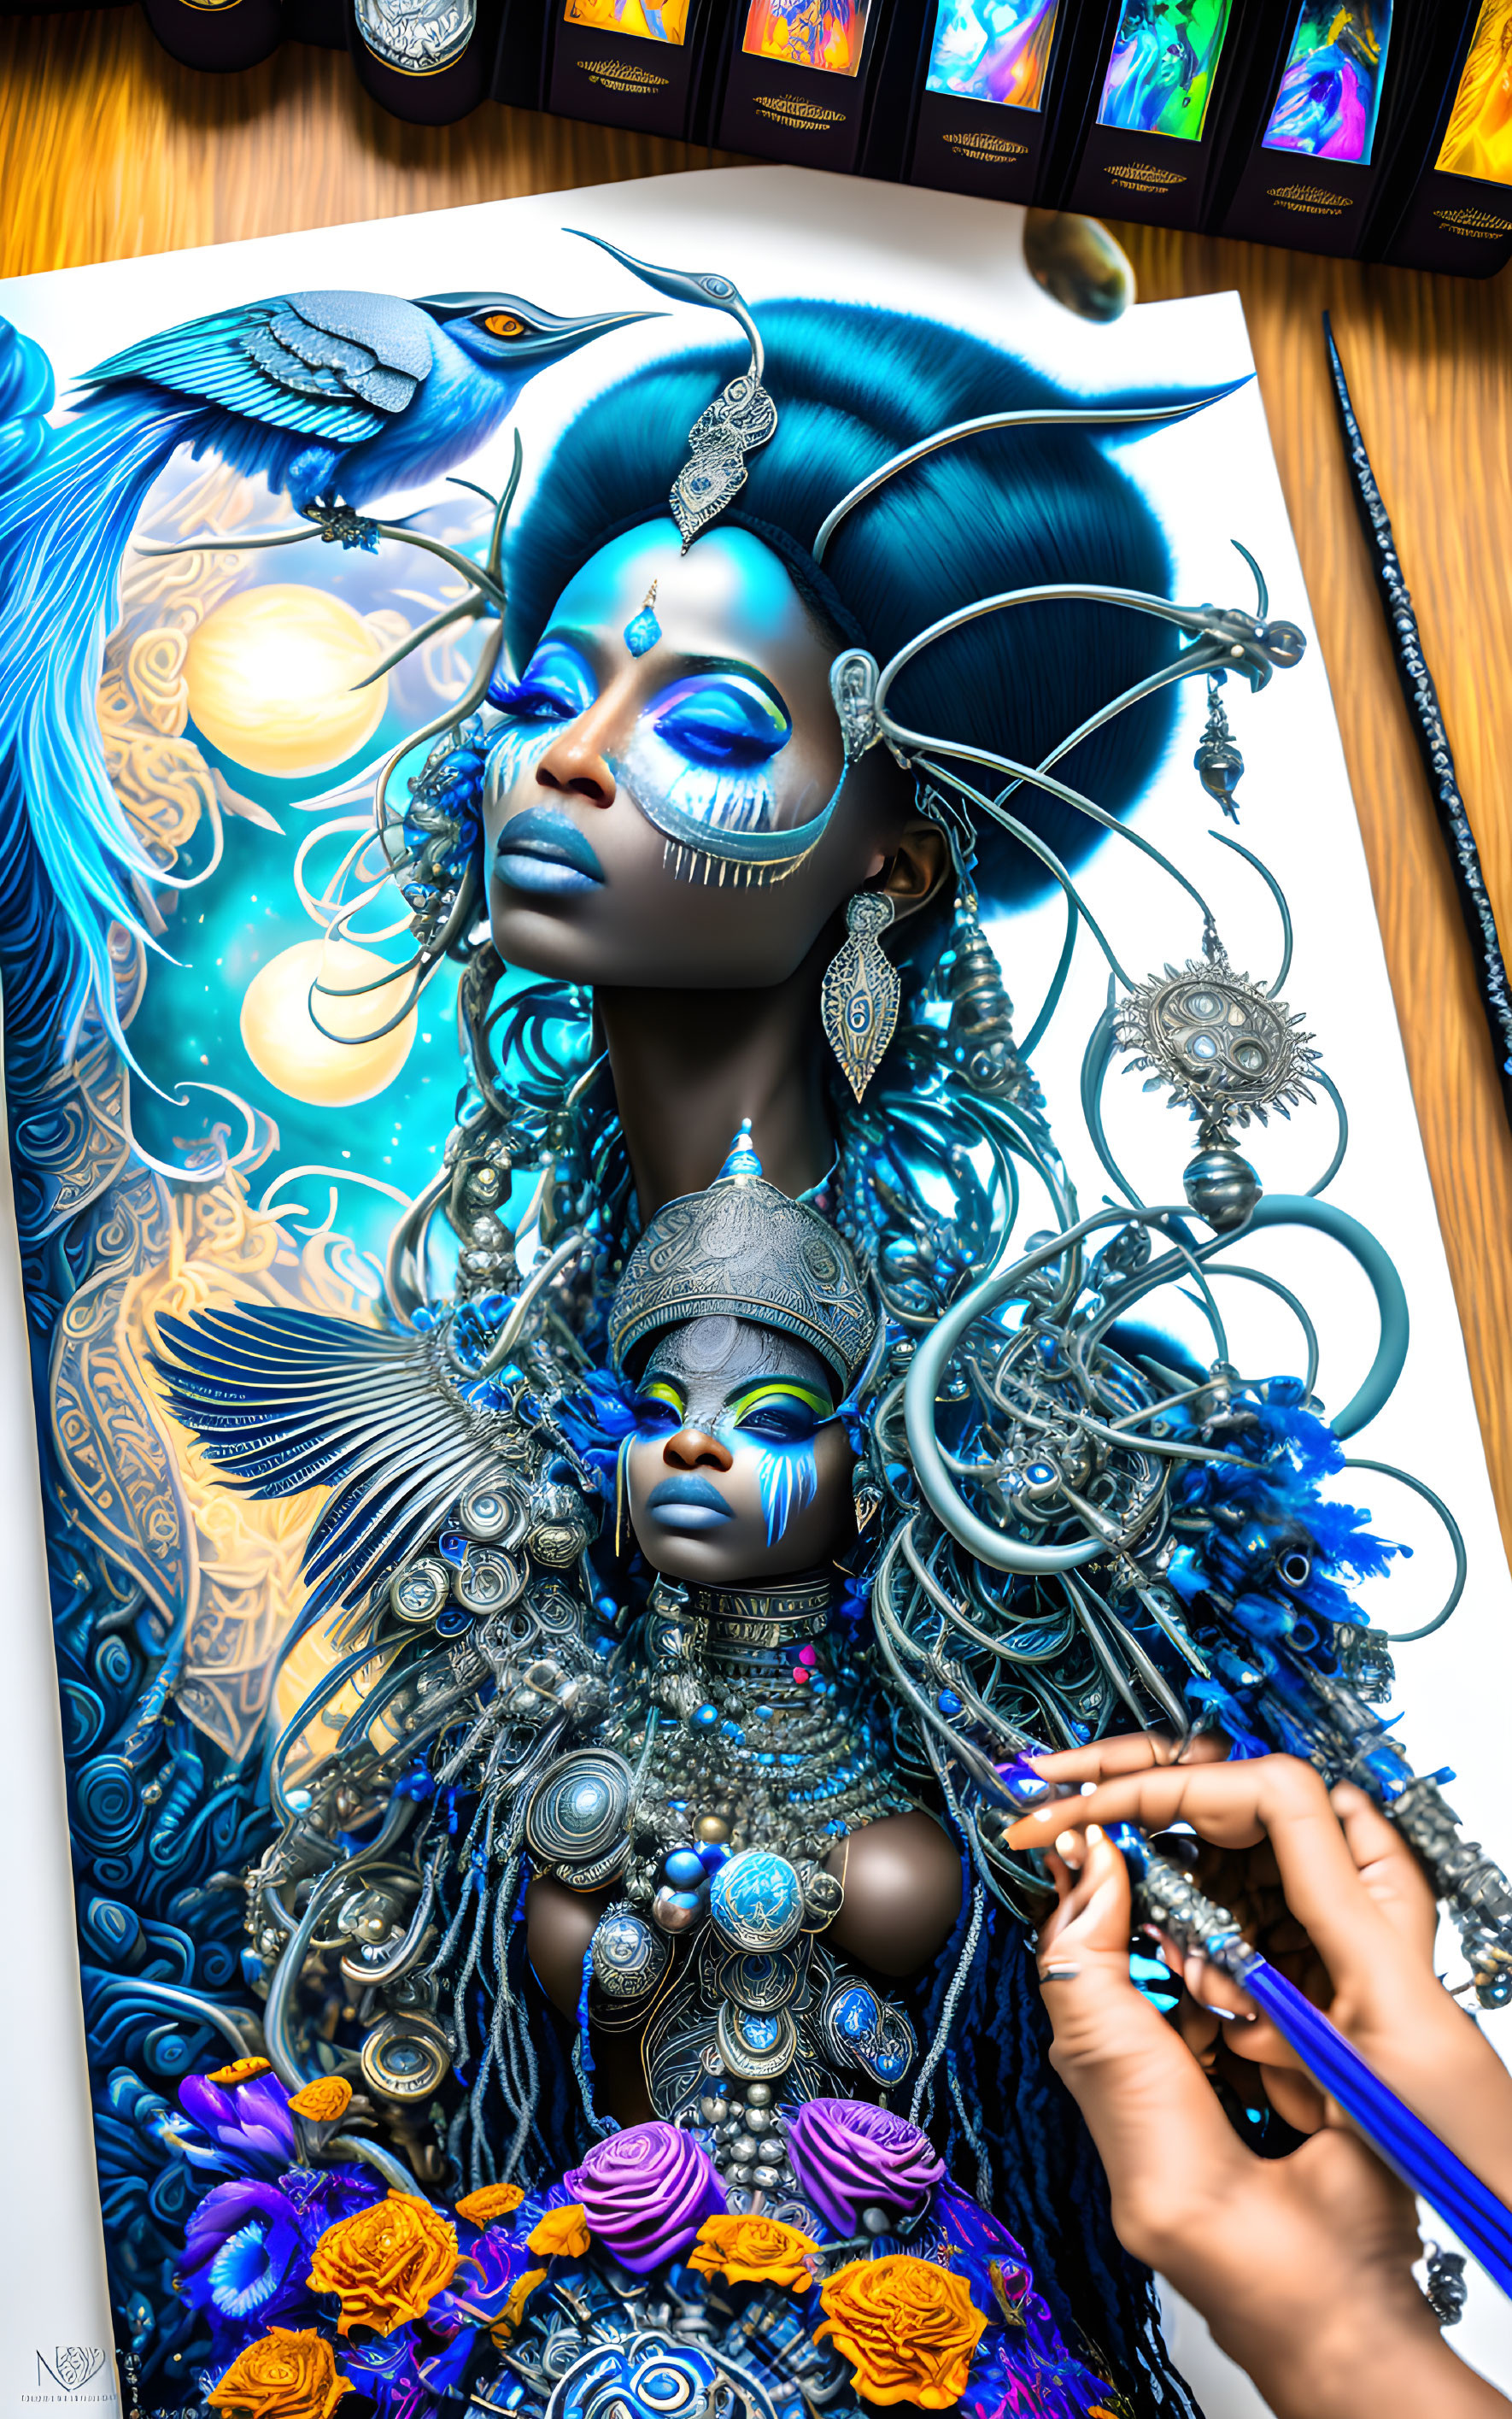 Detailed illustration of fantastical blue-skinned woman with intricate jewelry and feathers